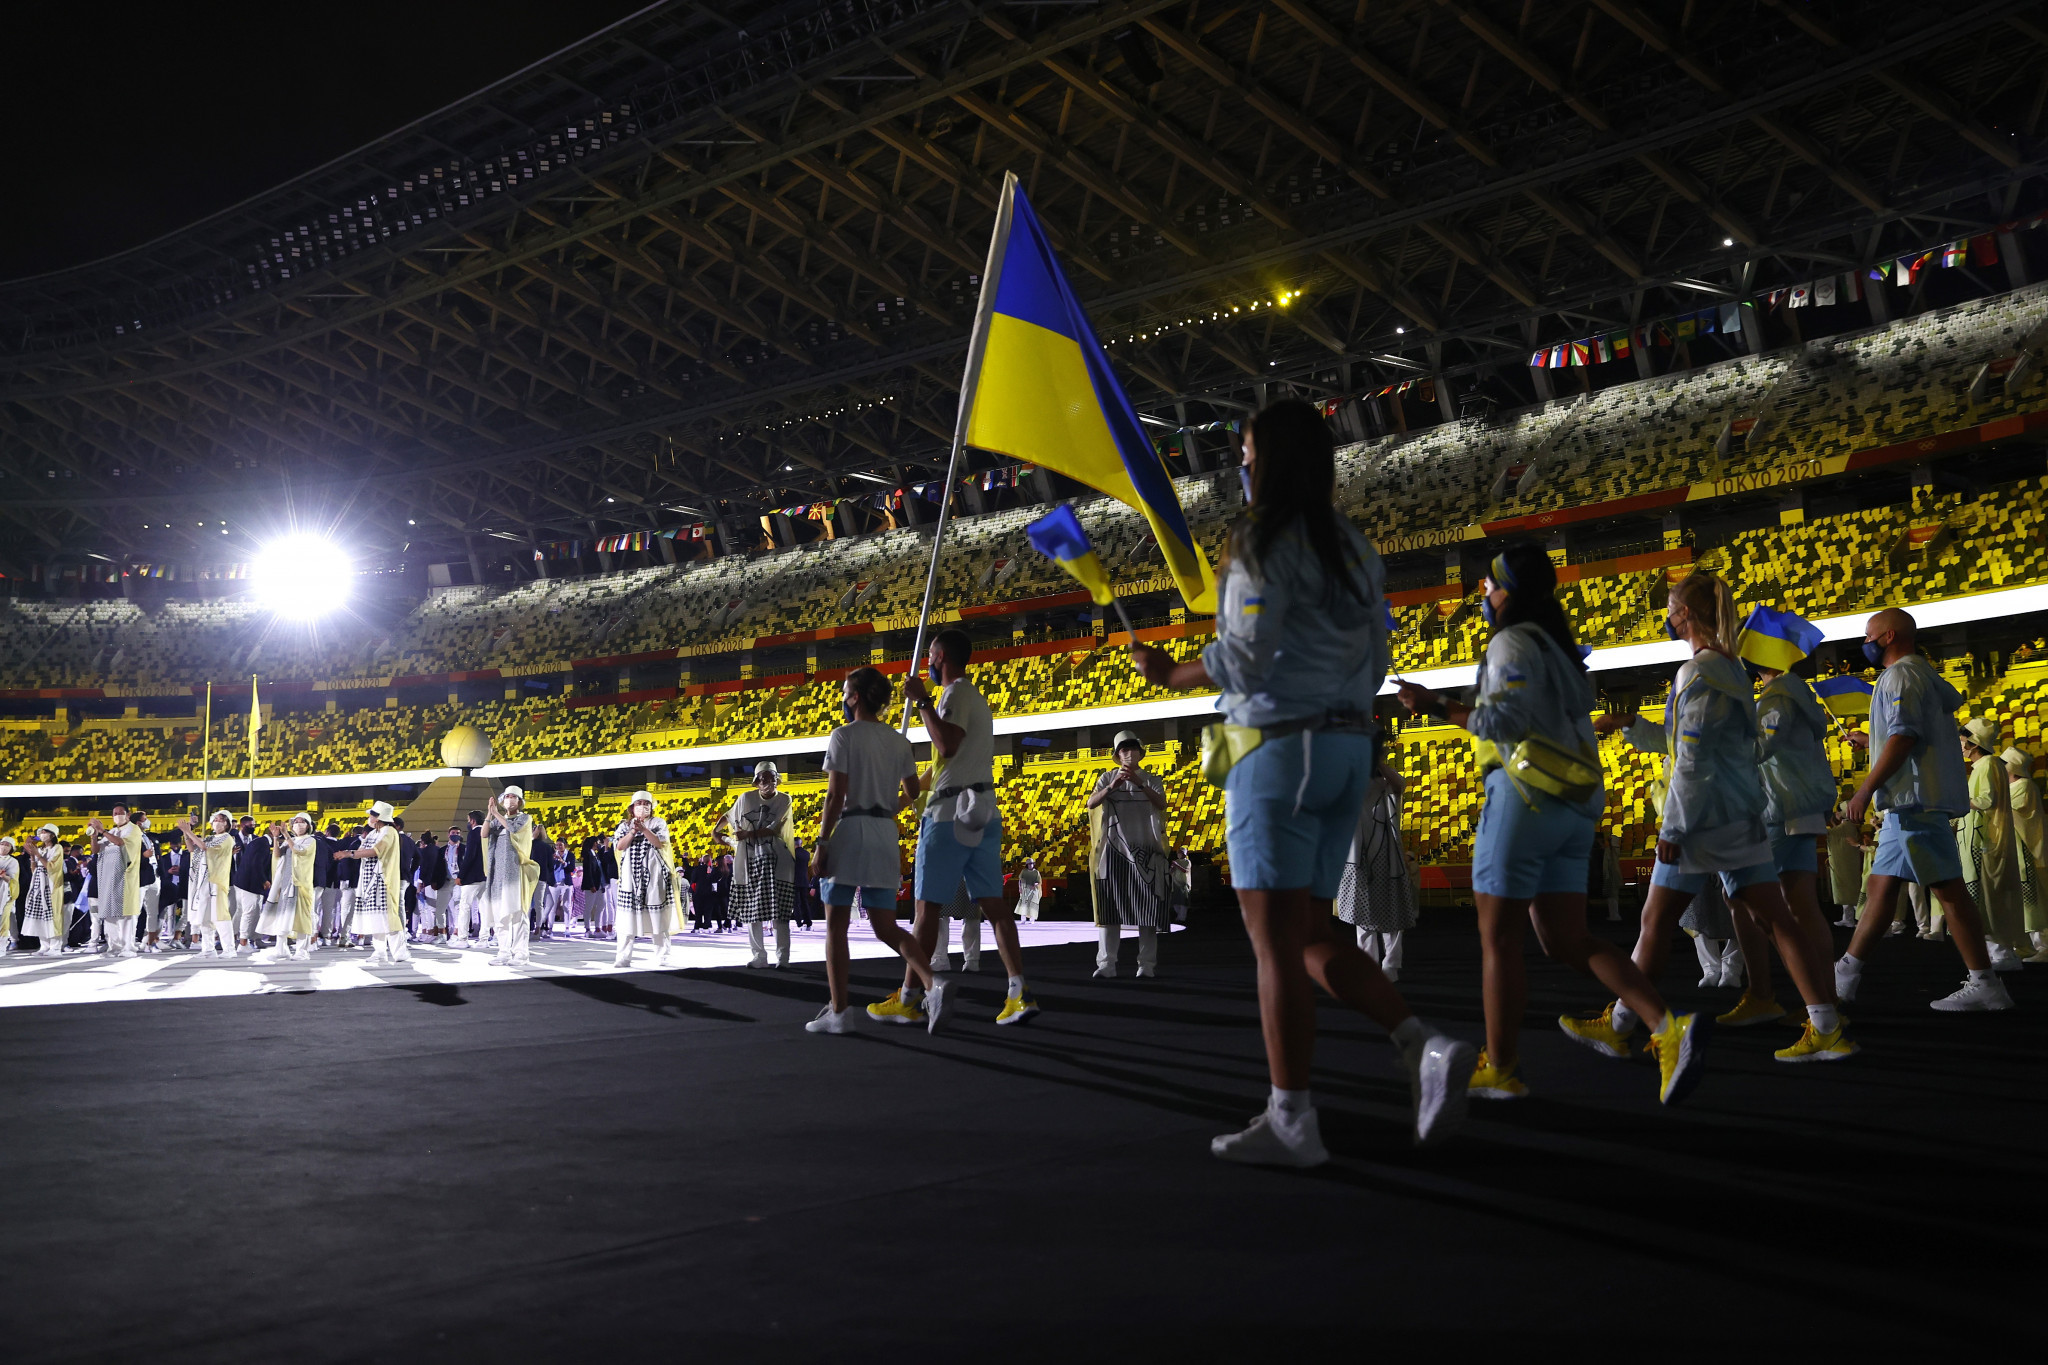 EOC President Spyros Capralos says he expects the Ukrainian team to get a standing ovation at the Opening Ceremony of the European Games ©Getty Images